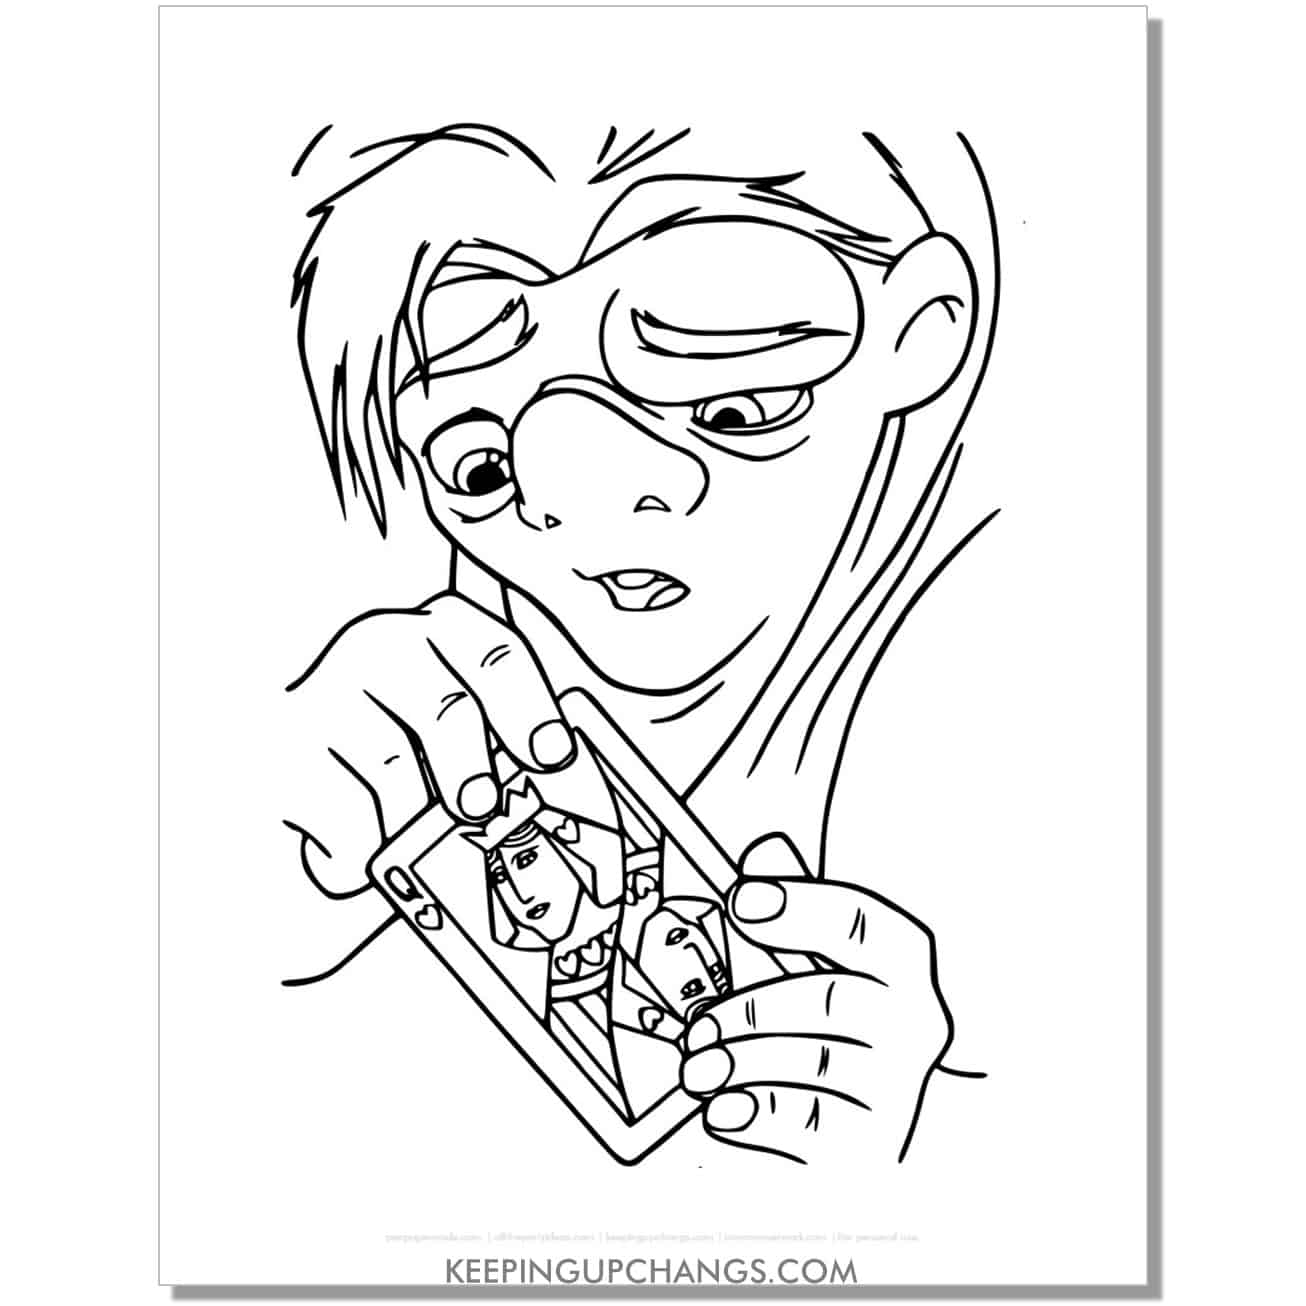 free quasimodo queen of hearts hunchback notre dame coloring page, sheet.